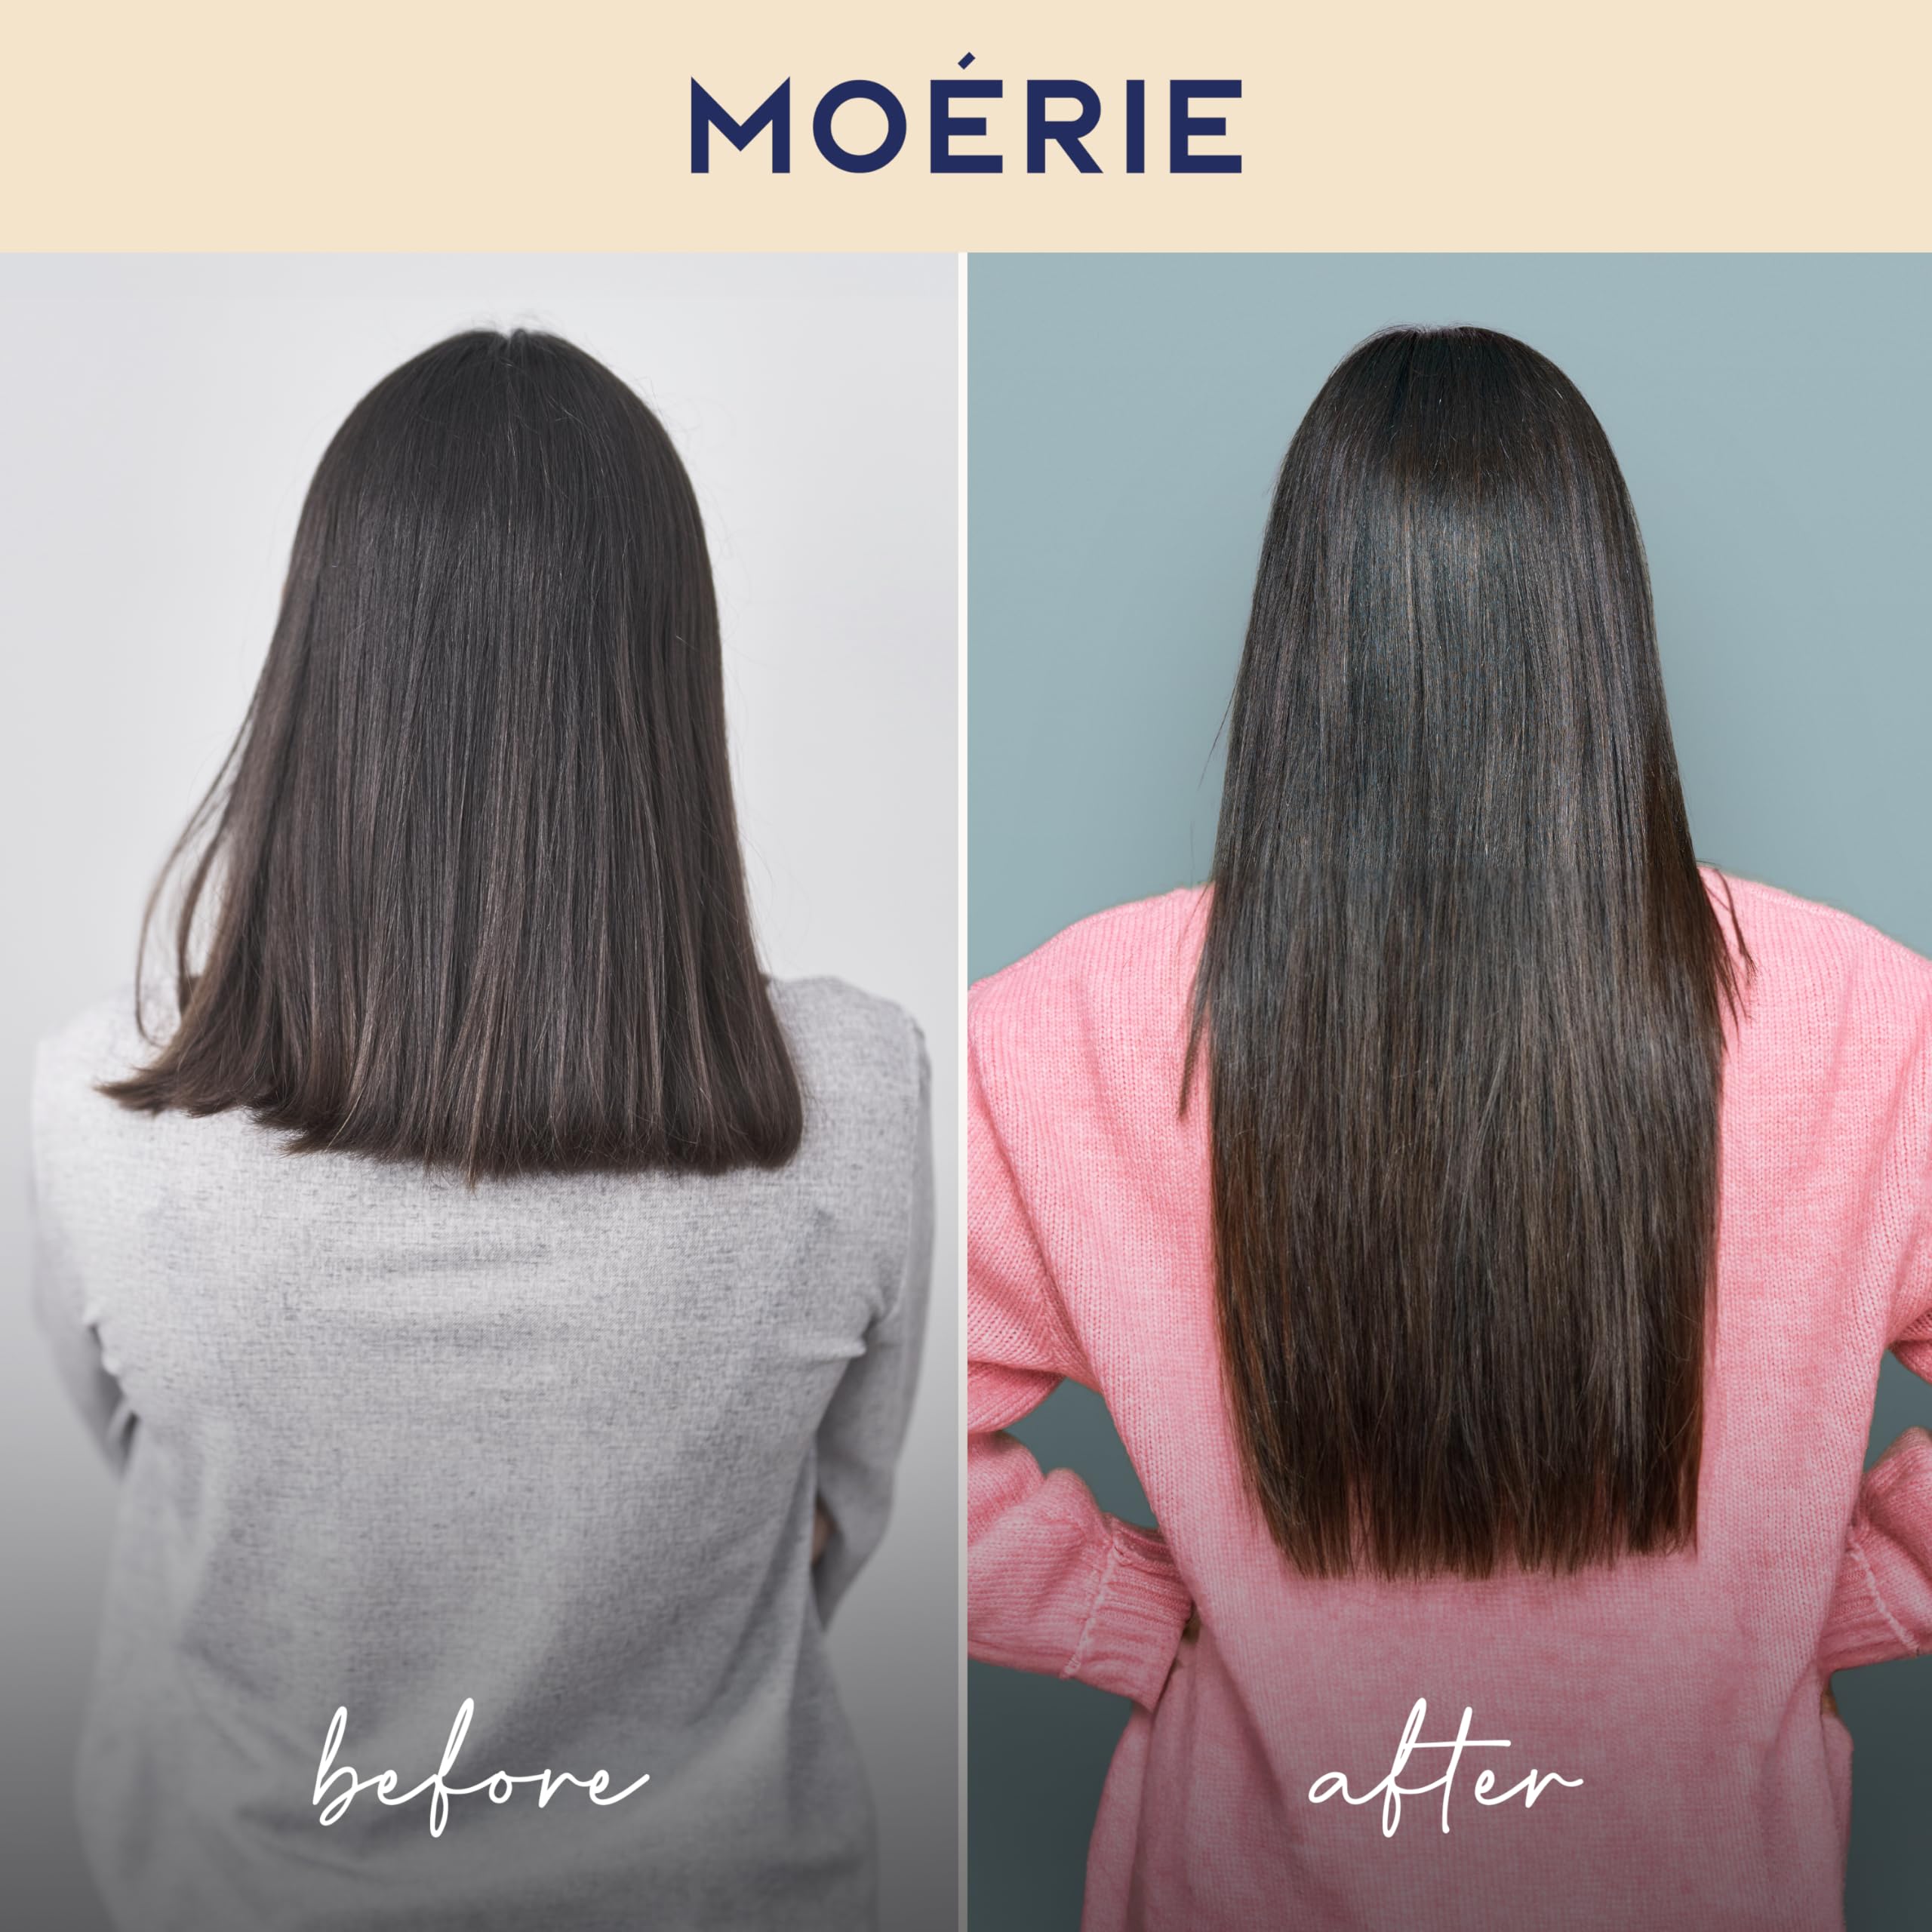 Moerie Volumizing Shampoo and Conditioner for Hair Loss - Thickening Products with Ingredients of Natural Origin - Over 100 Active Ingredients for Thick, Long, Luscious Hair, 2 X 8.45 Fl Oz